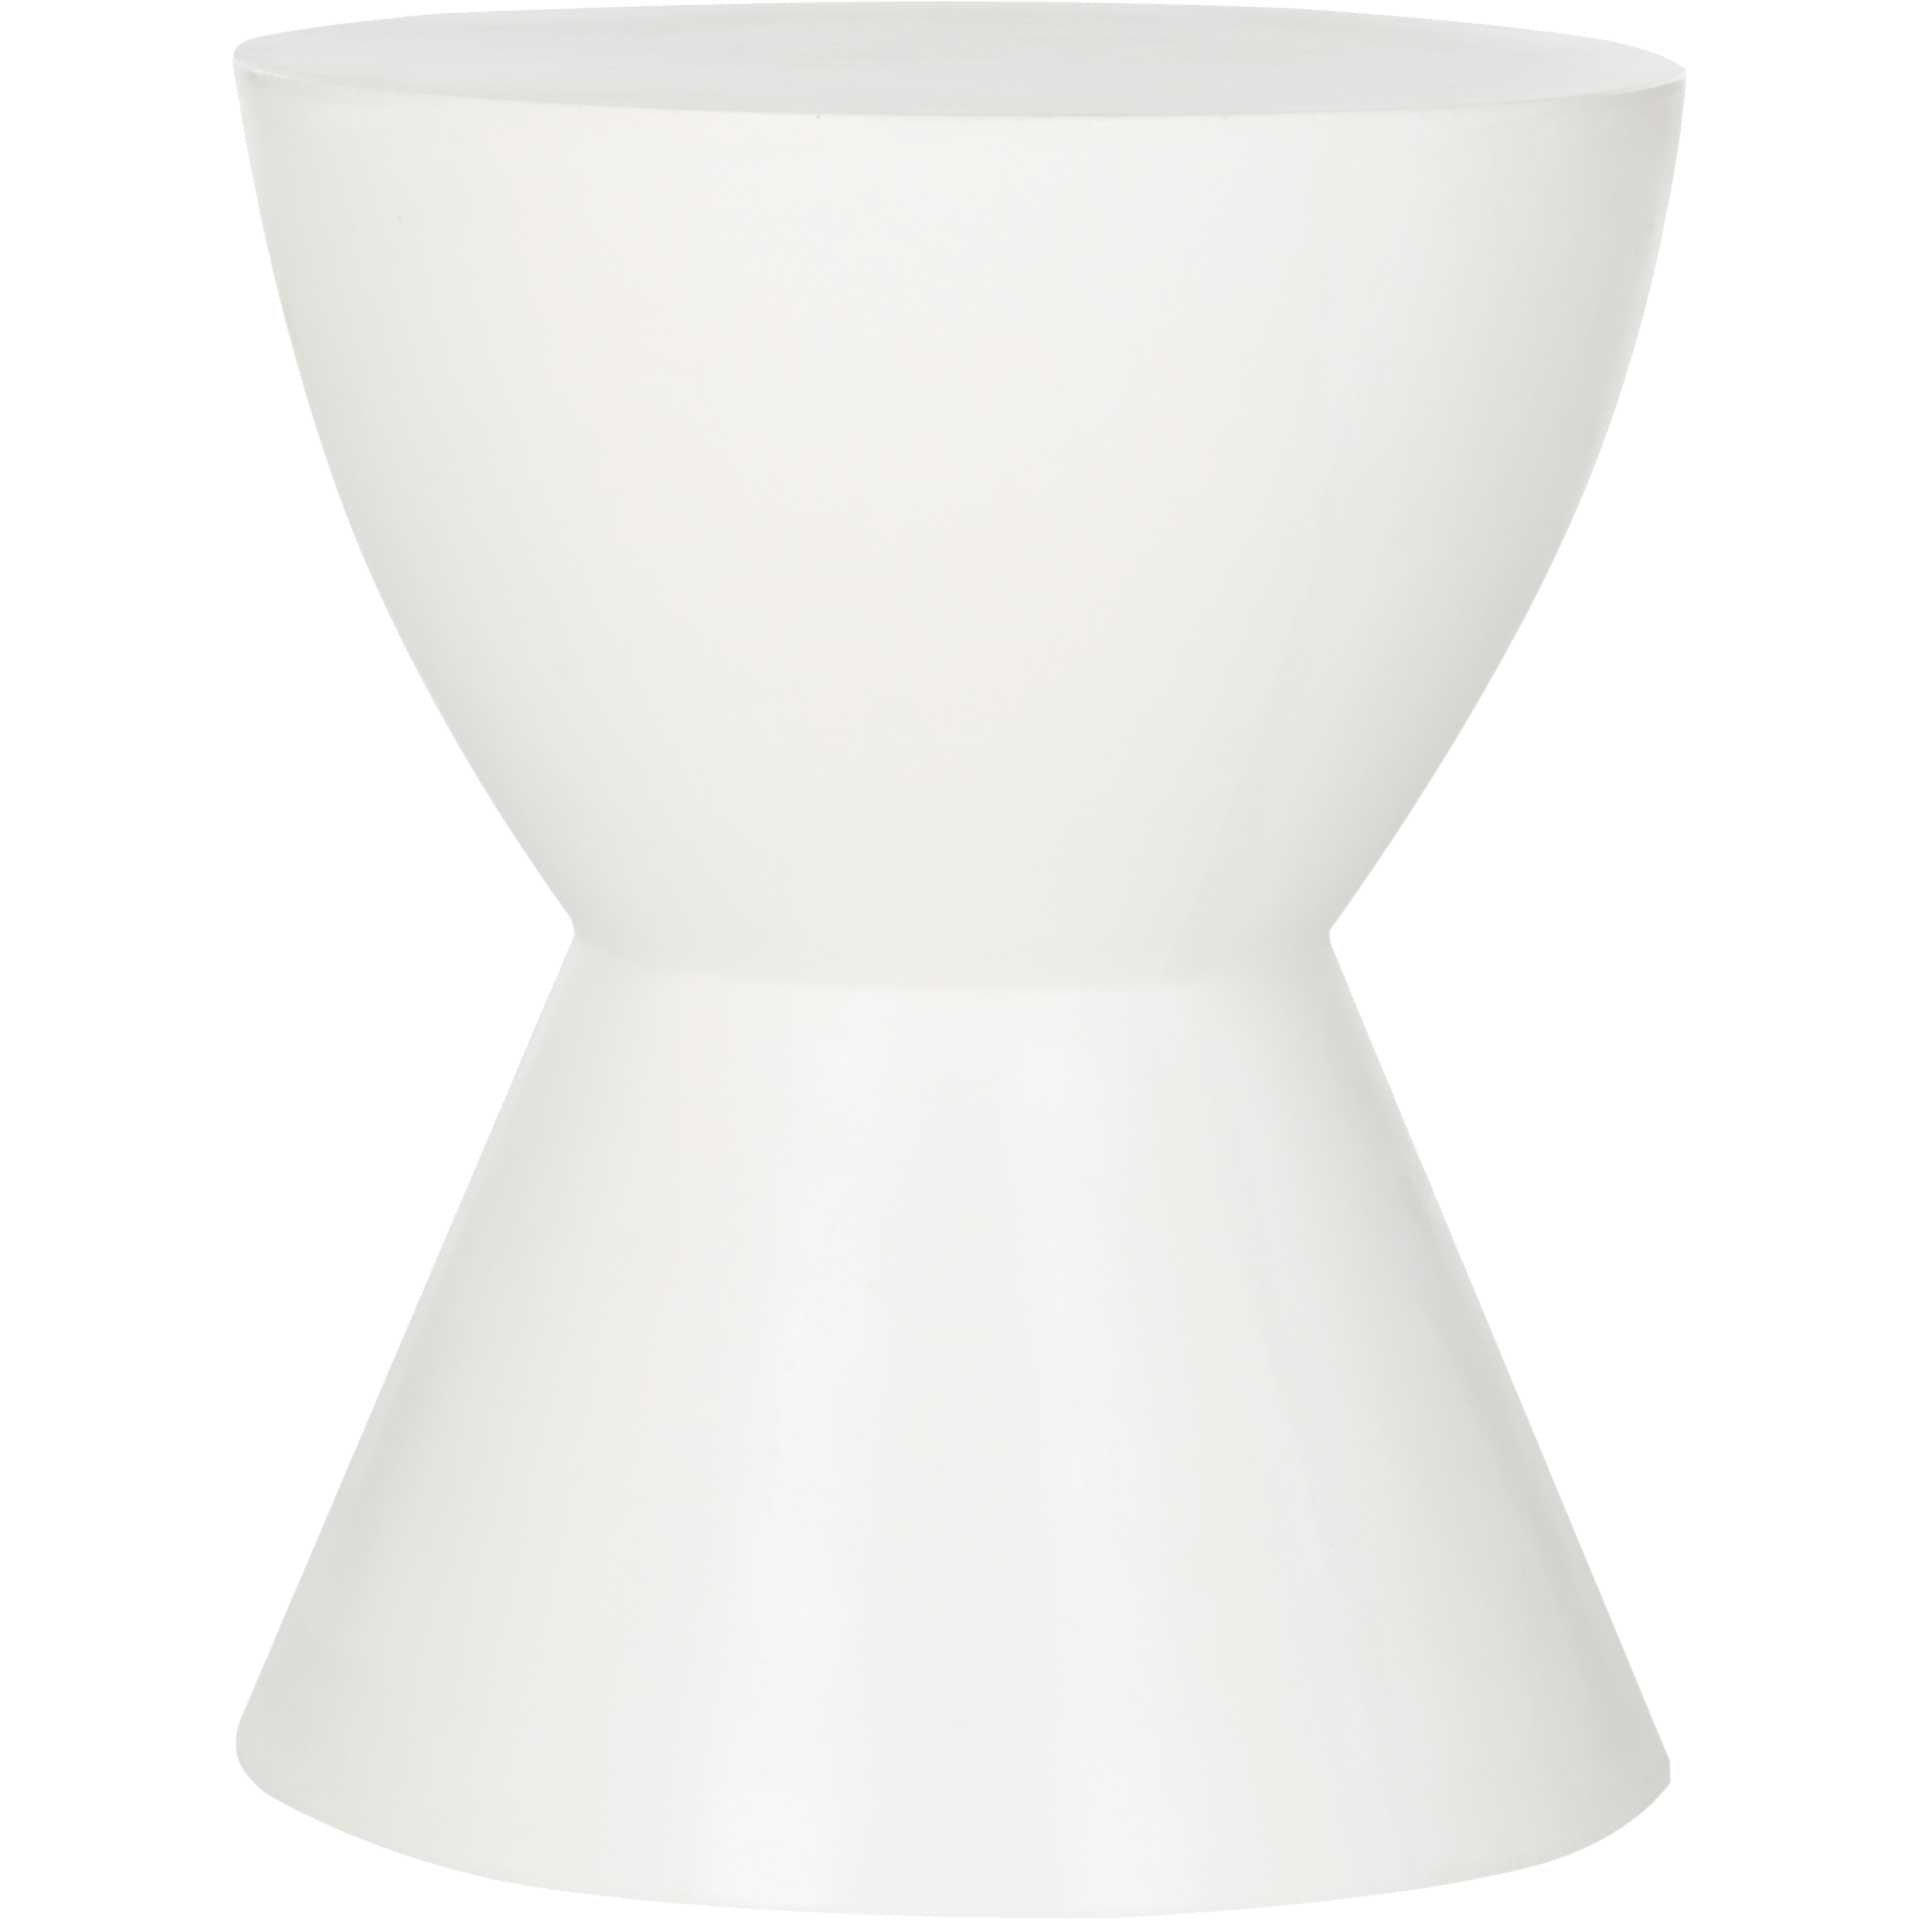 Atalia Modern Concrete Round Accent Table Ivory